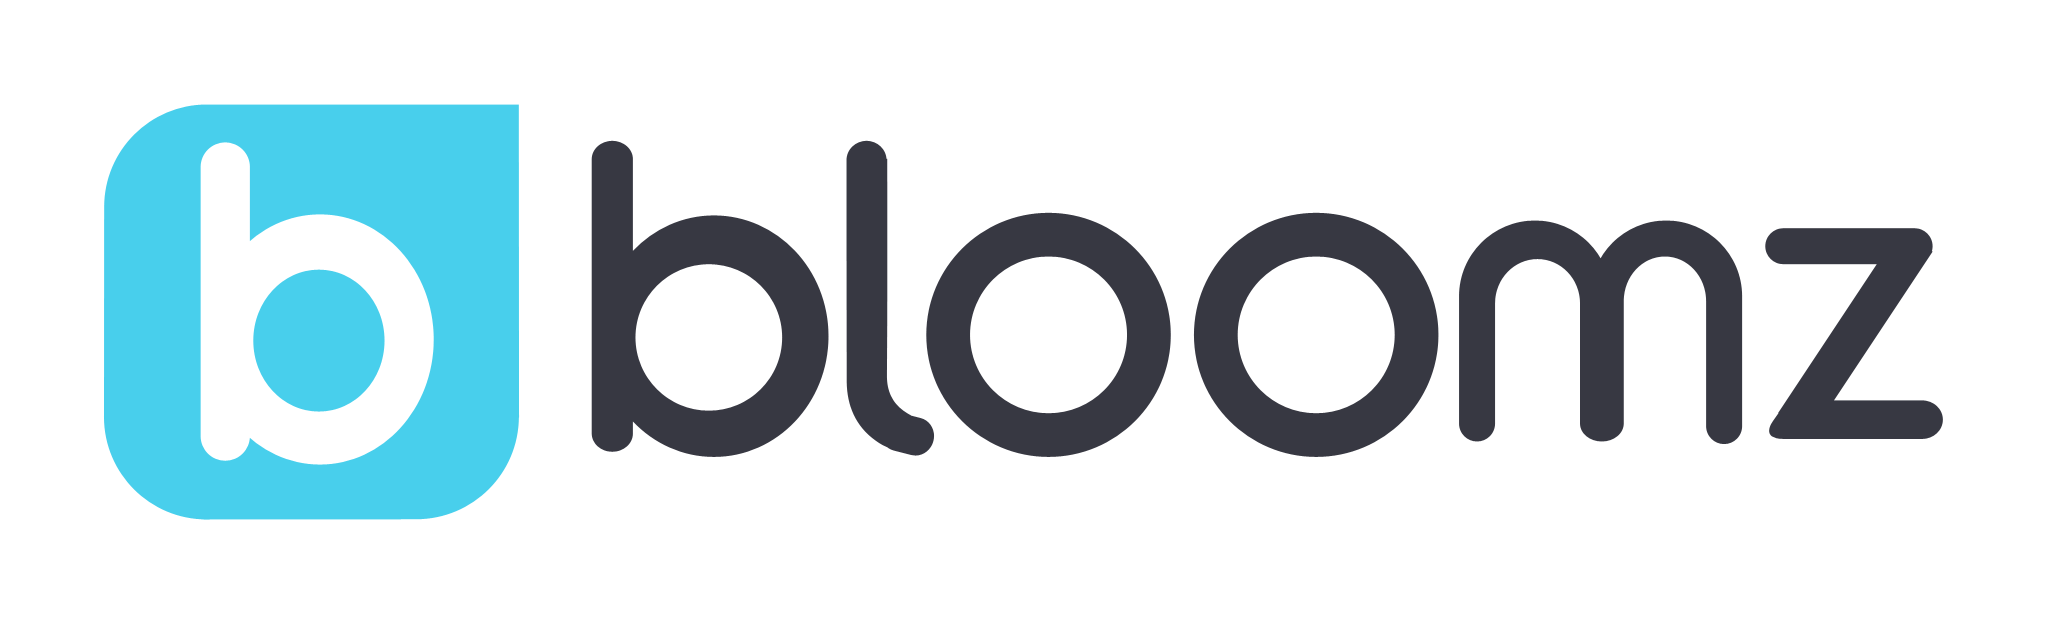 Bloomz: A Powerful Tool for Home/School Communication